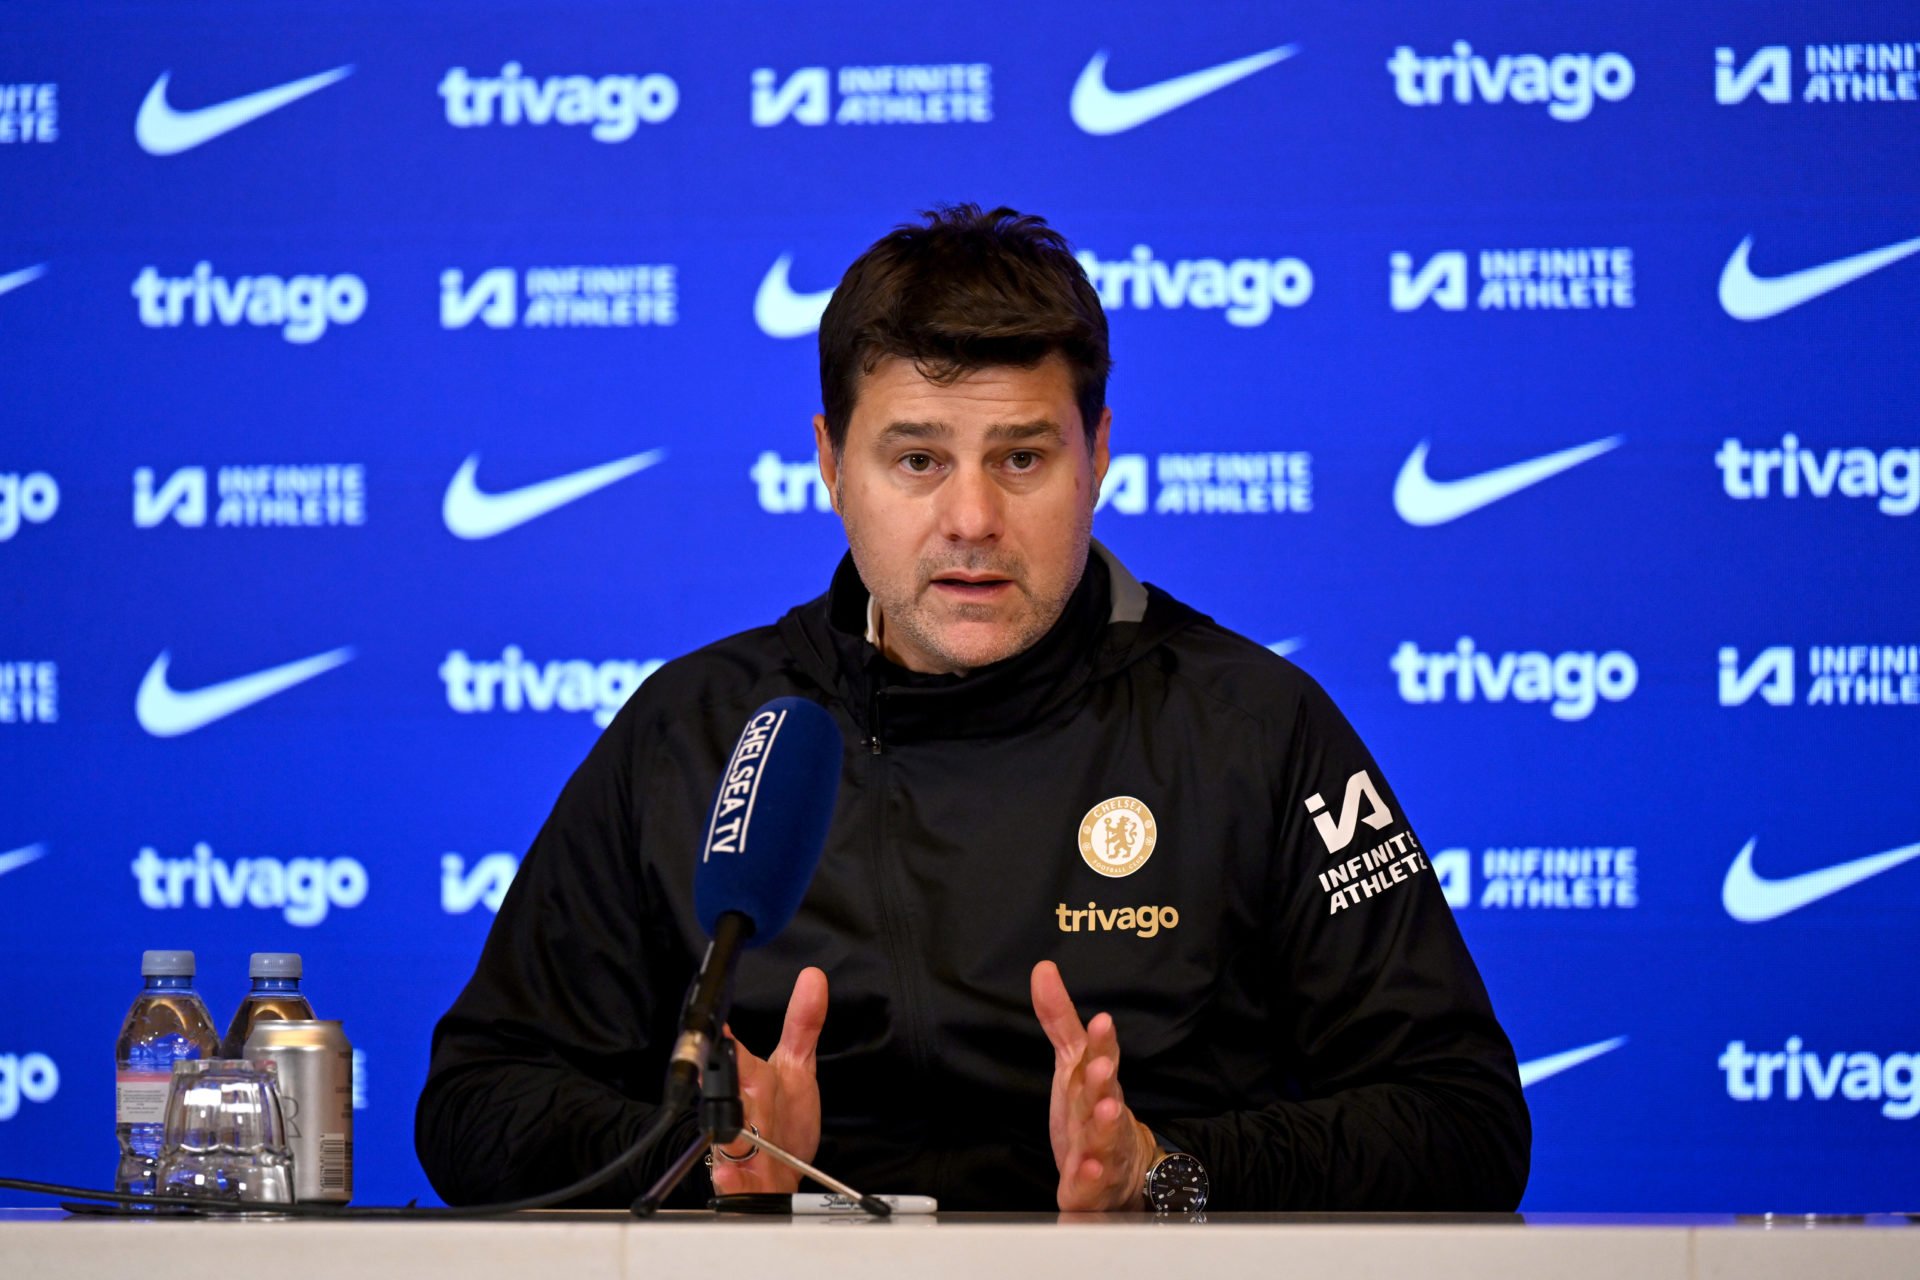 Behind the scenes'… Journalist shares what he's heard about Mauricio  Pochettino at Chelsea